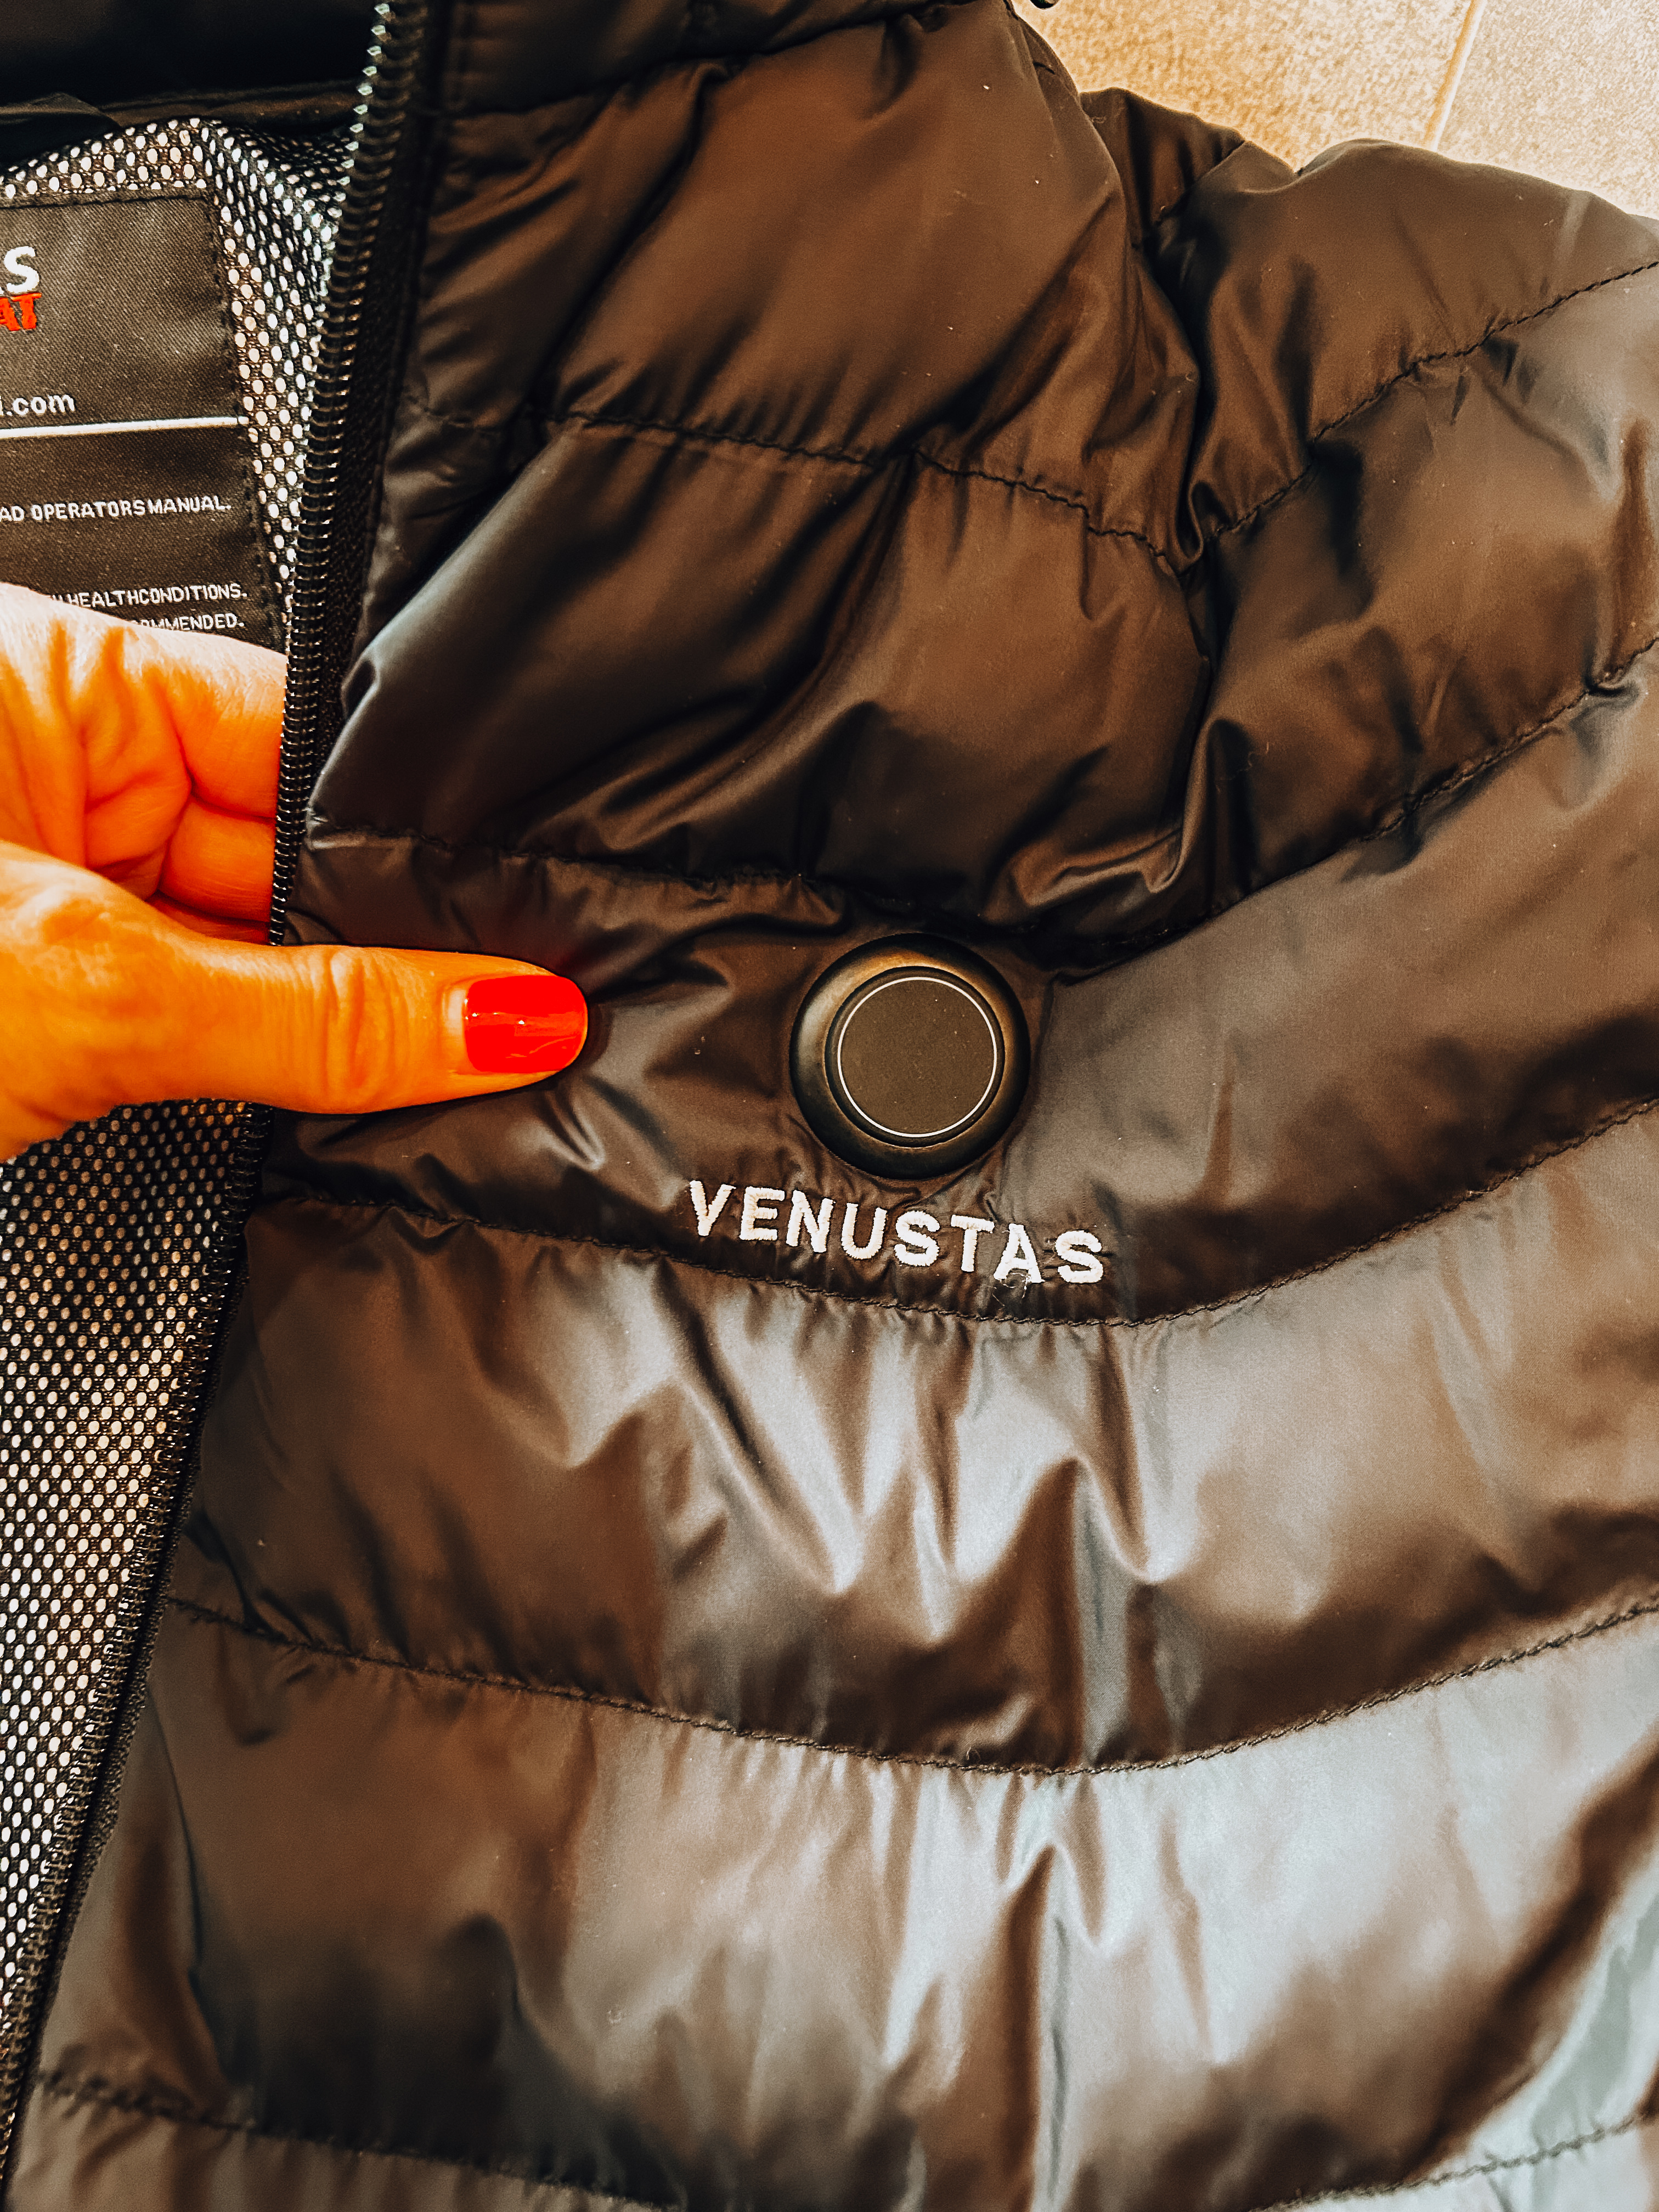 Venustas Heated Jackets Review After Use